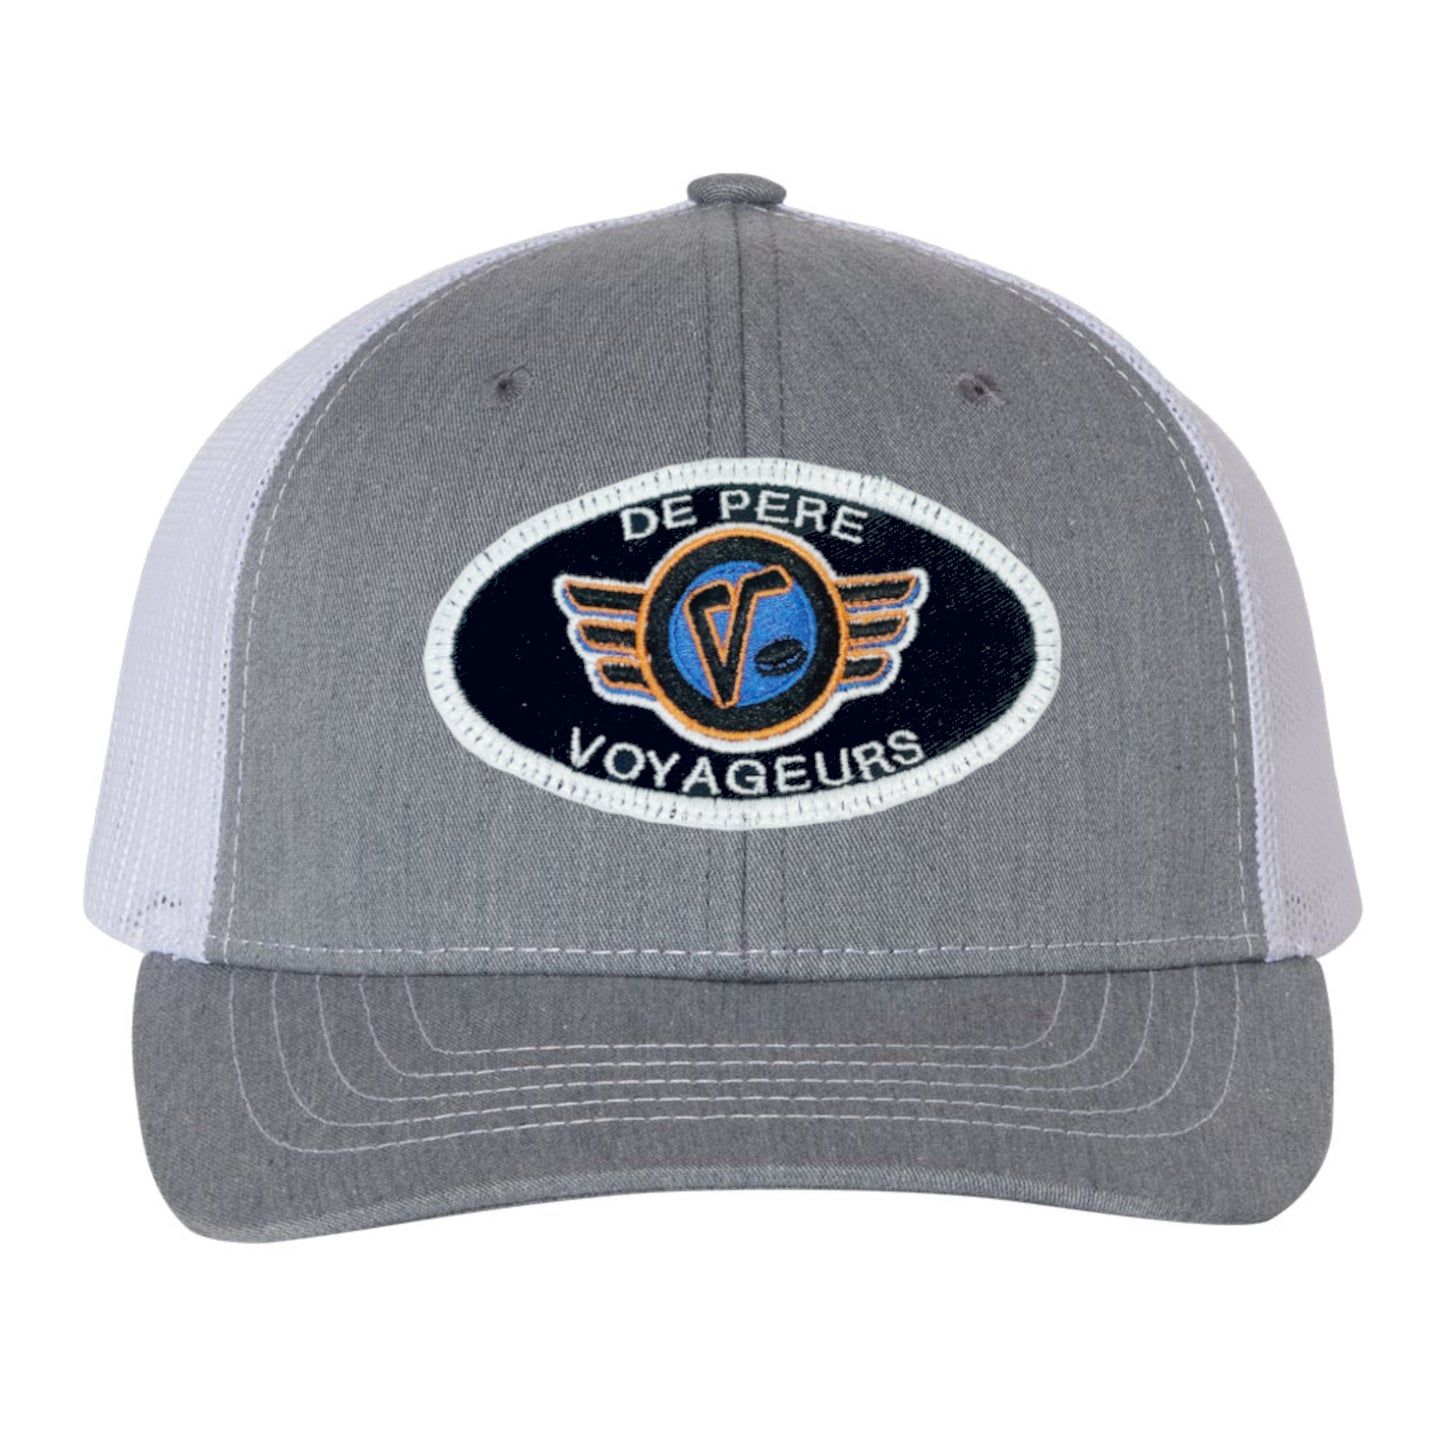 De Pere Voyageurs Youth Hockey Patch De Pere Gray YOUTH sized snapback